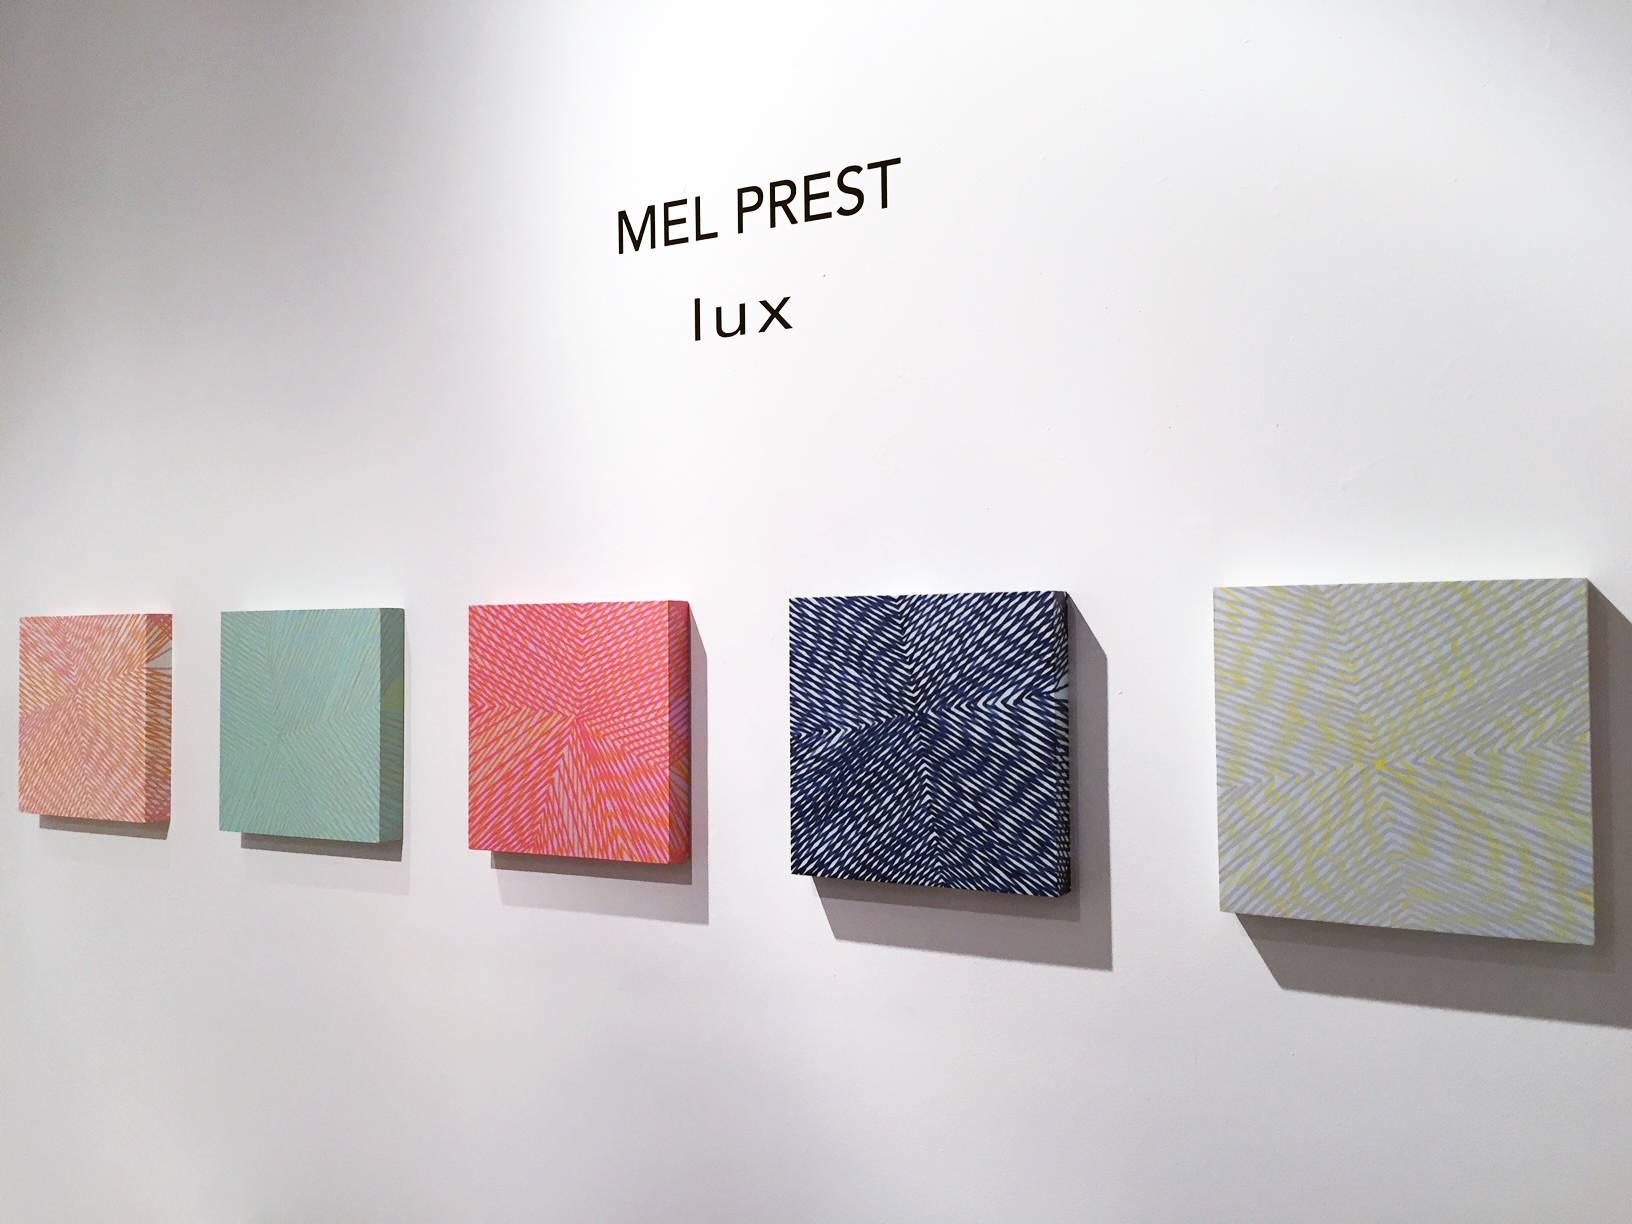 Mel Prest
Melon Ball, 2018
Acrylic on panel
12h x 12w in

Living and working in San Francisco for many years, artist and curator Mel Prest has become acutely attentive to the optical phenomena offered by the region’s geography. The San Francisco